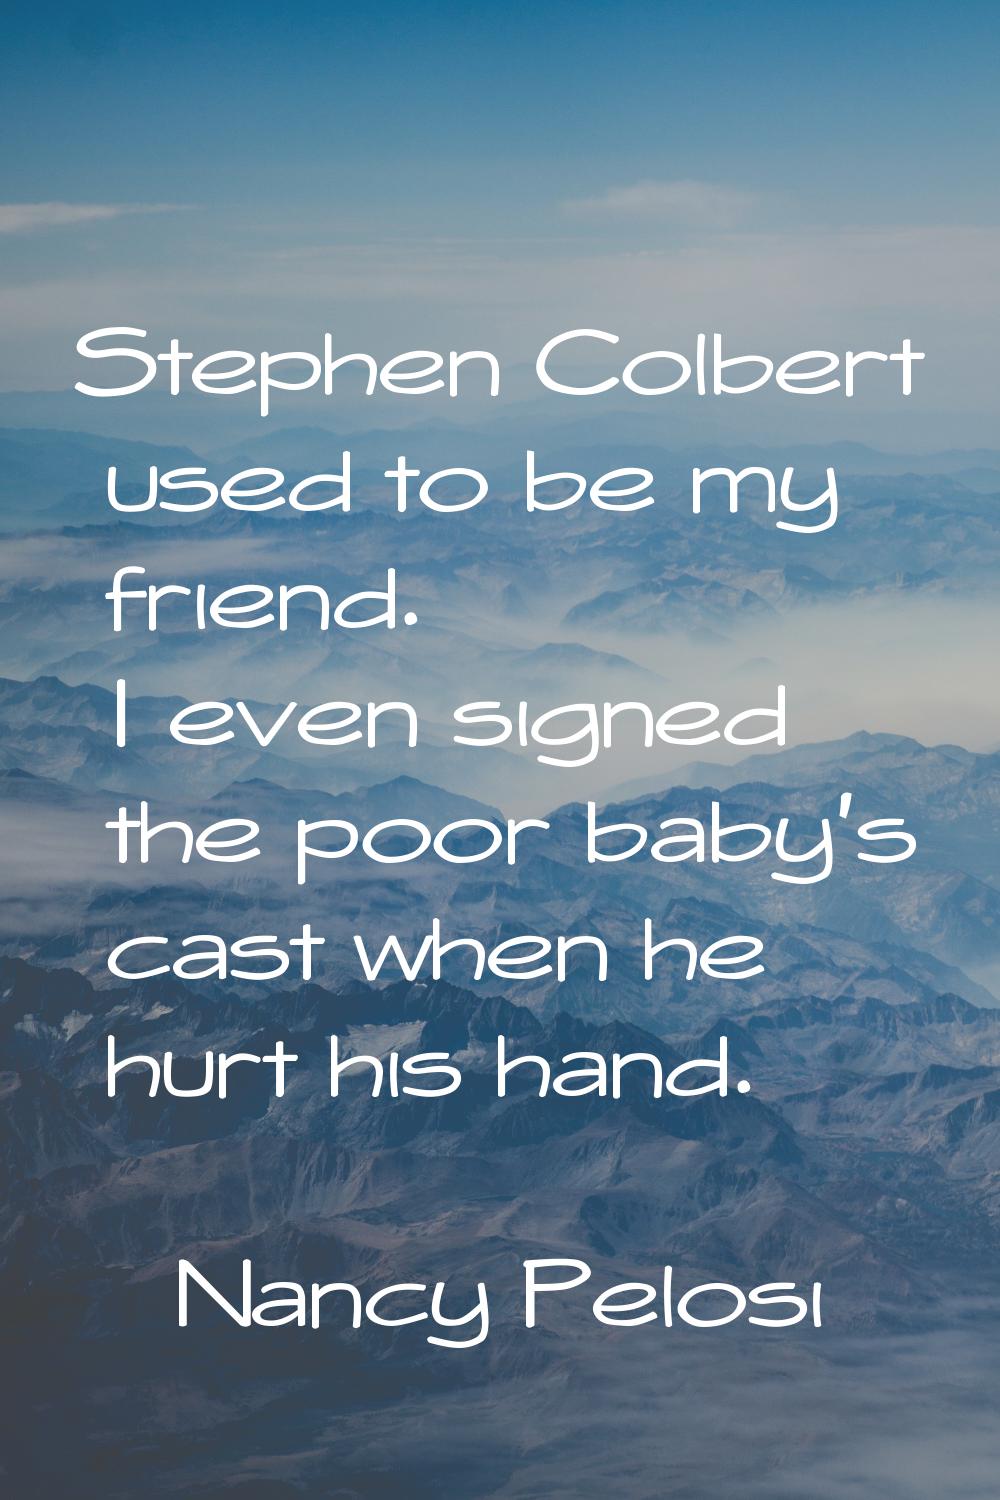 Stephen Colbert used to be my friend. I even signed the poor baby's cast when he hurt his hand.